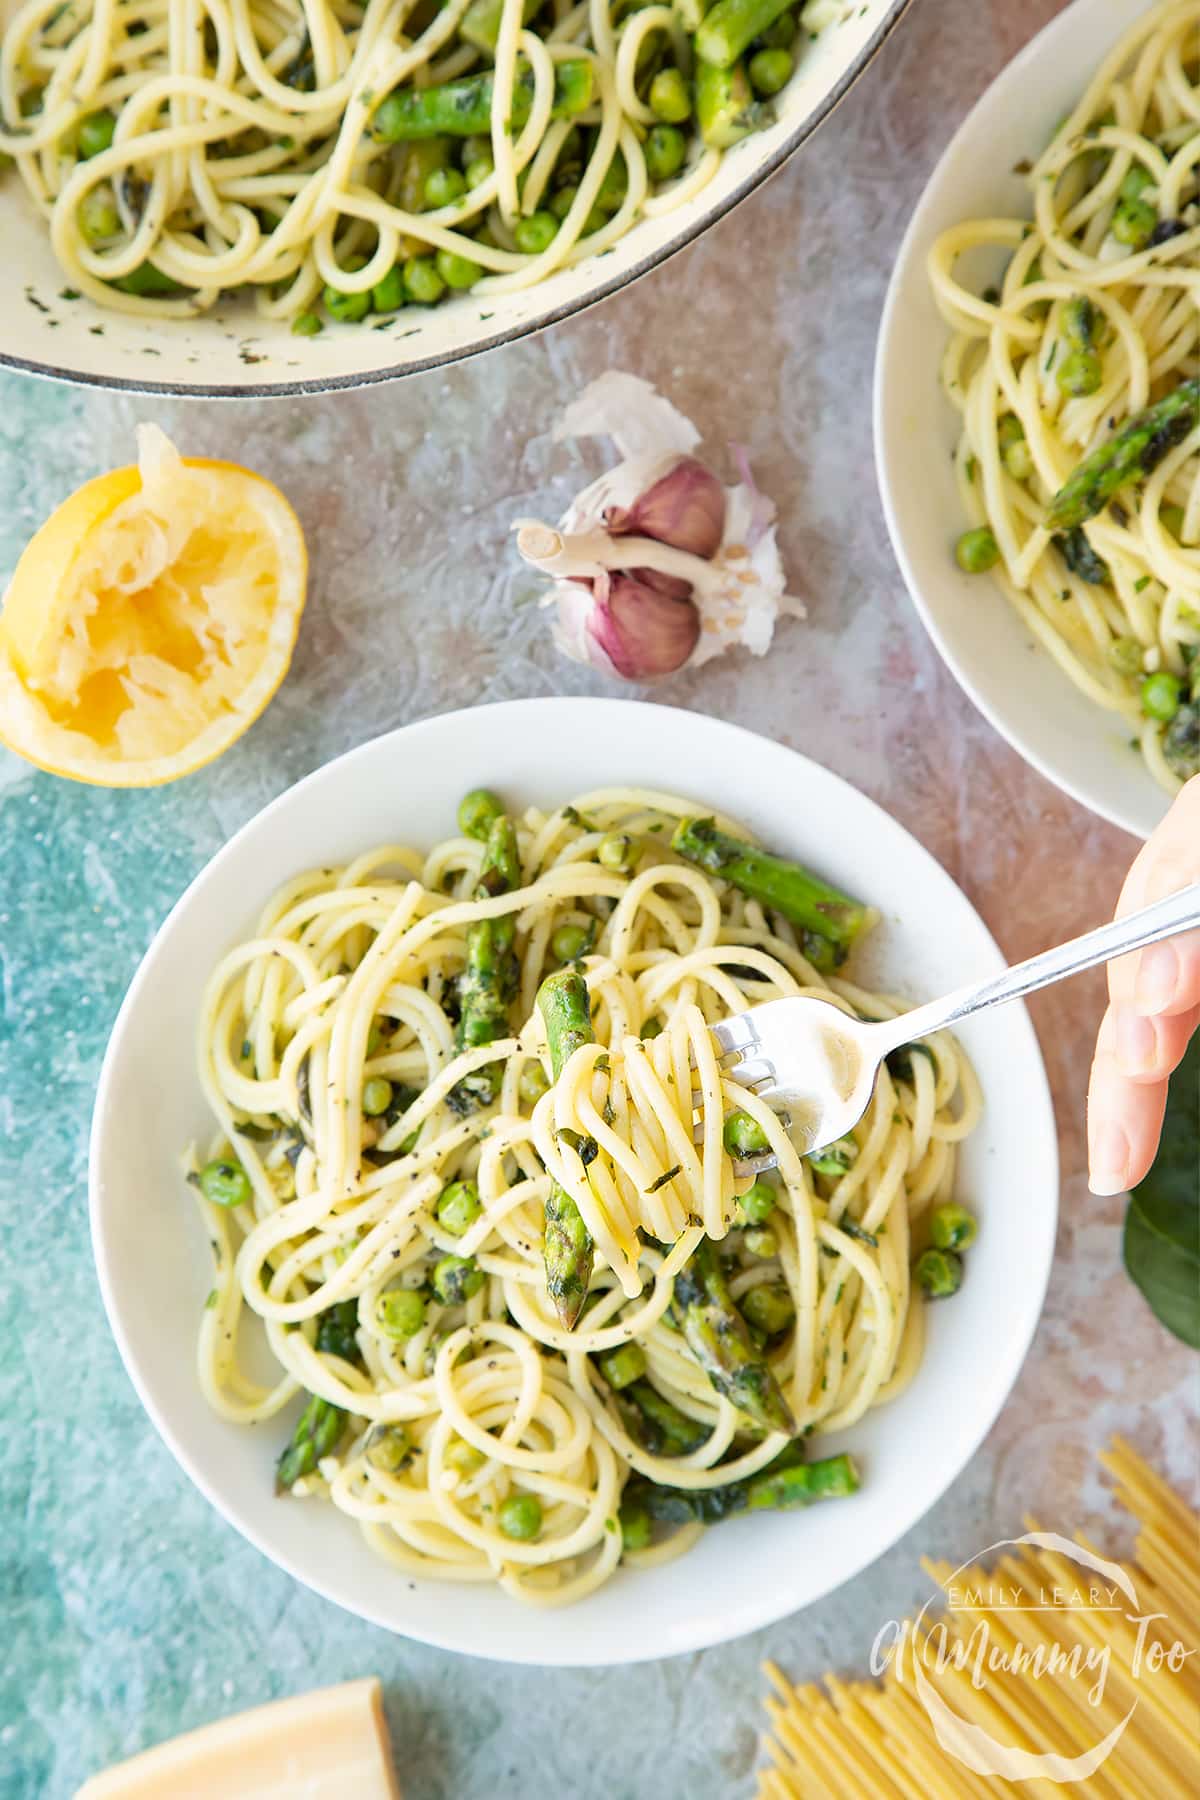 Summer spaghetti with spinach, basil, asparagus and peas, served in white bowls. Shown from above, a hand holds a fork with spaghetti twisted on it.